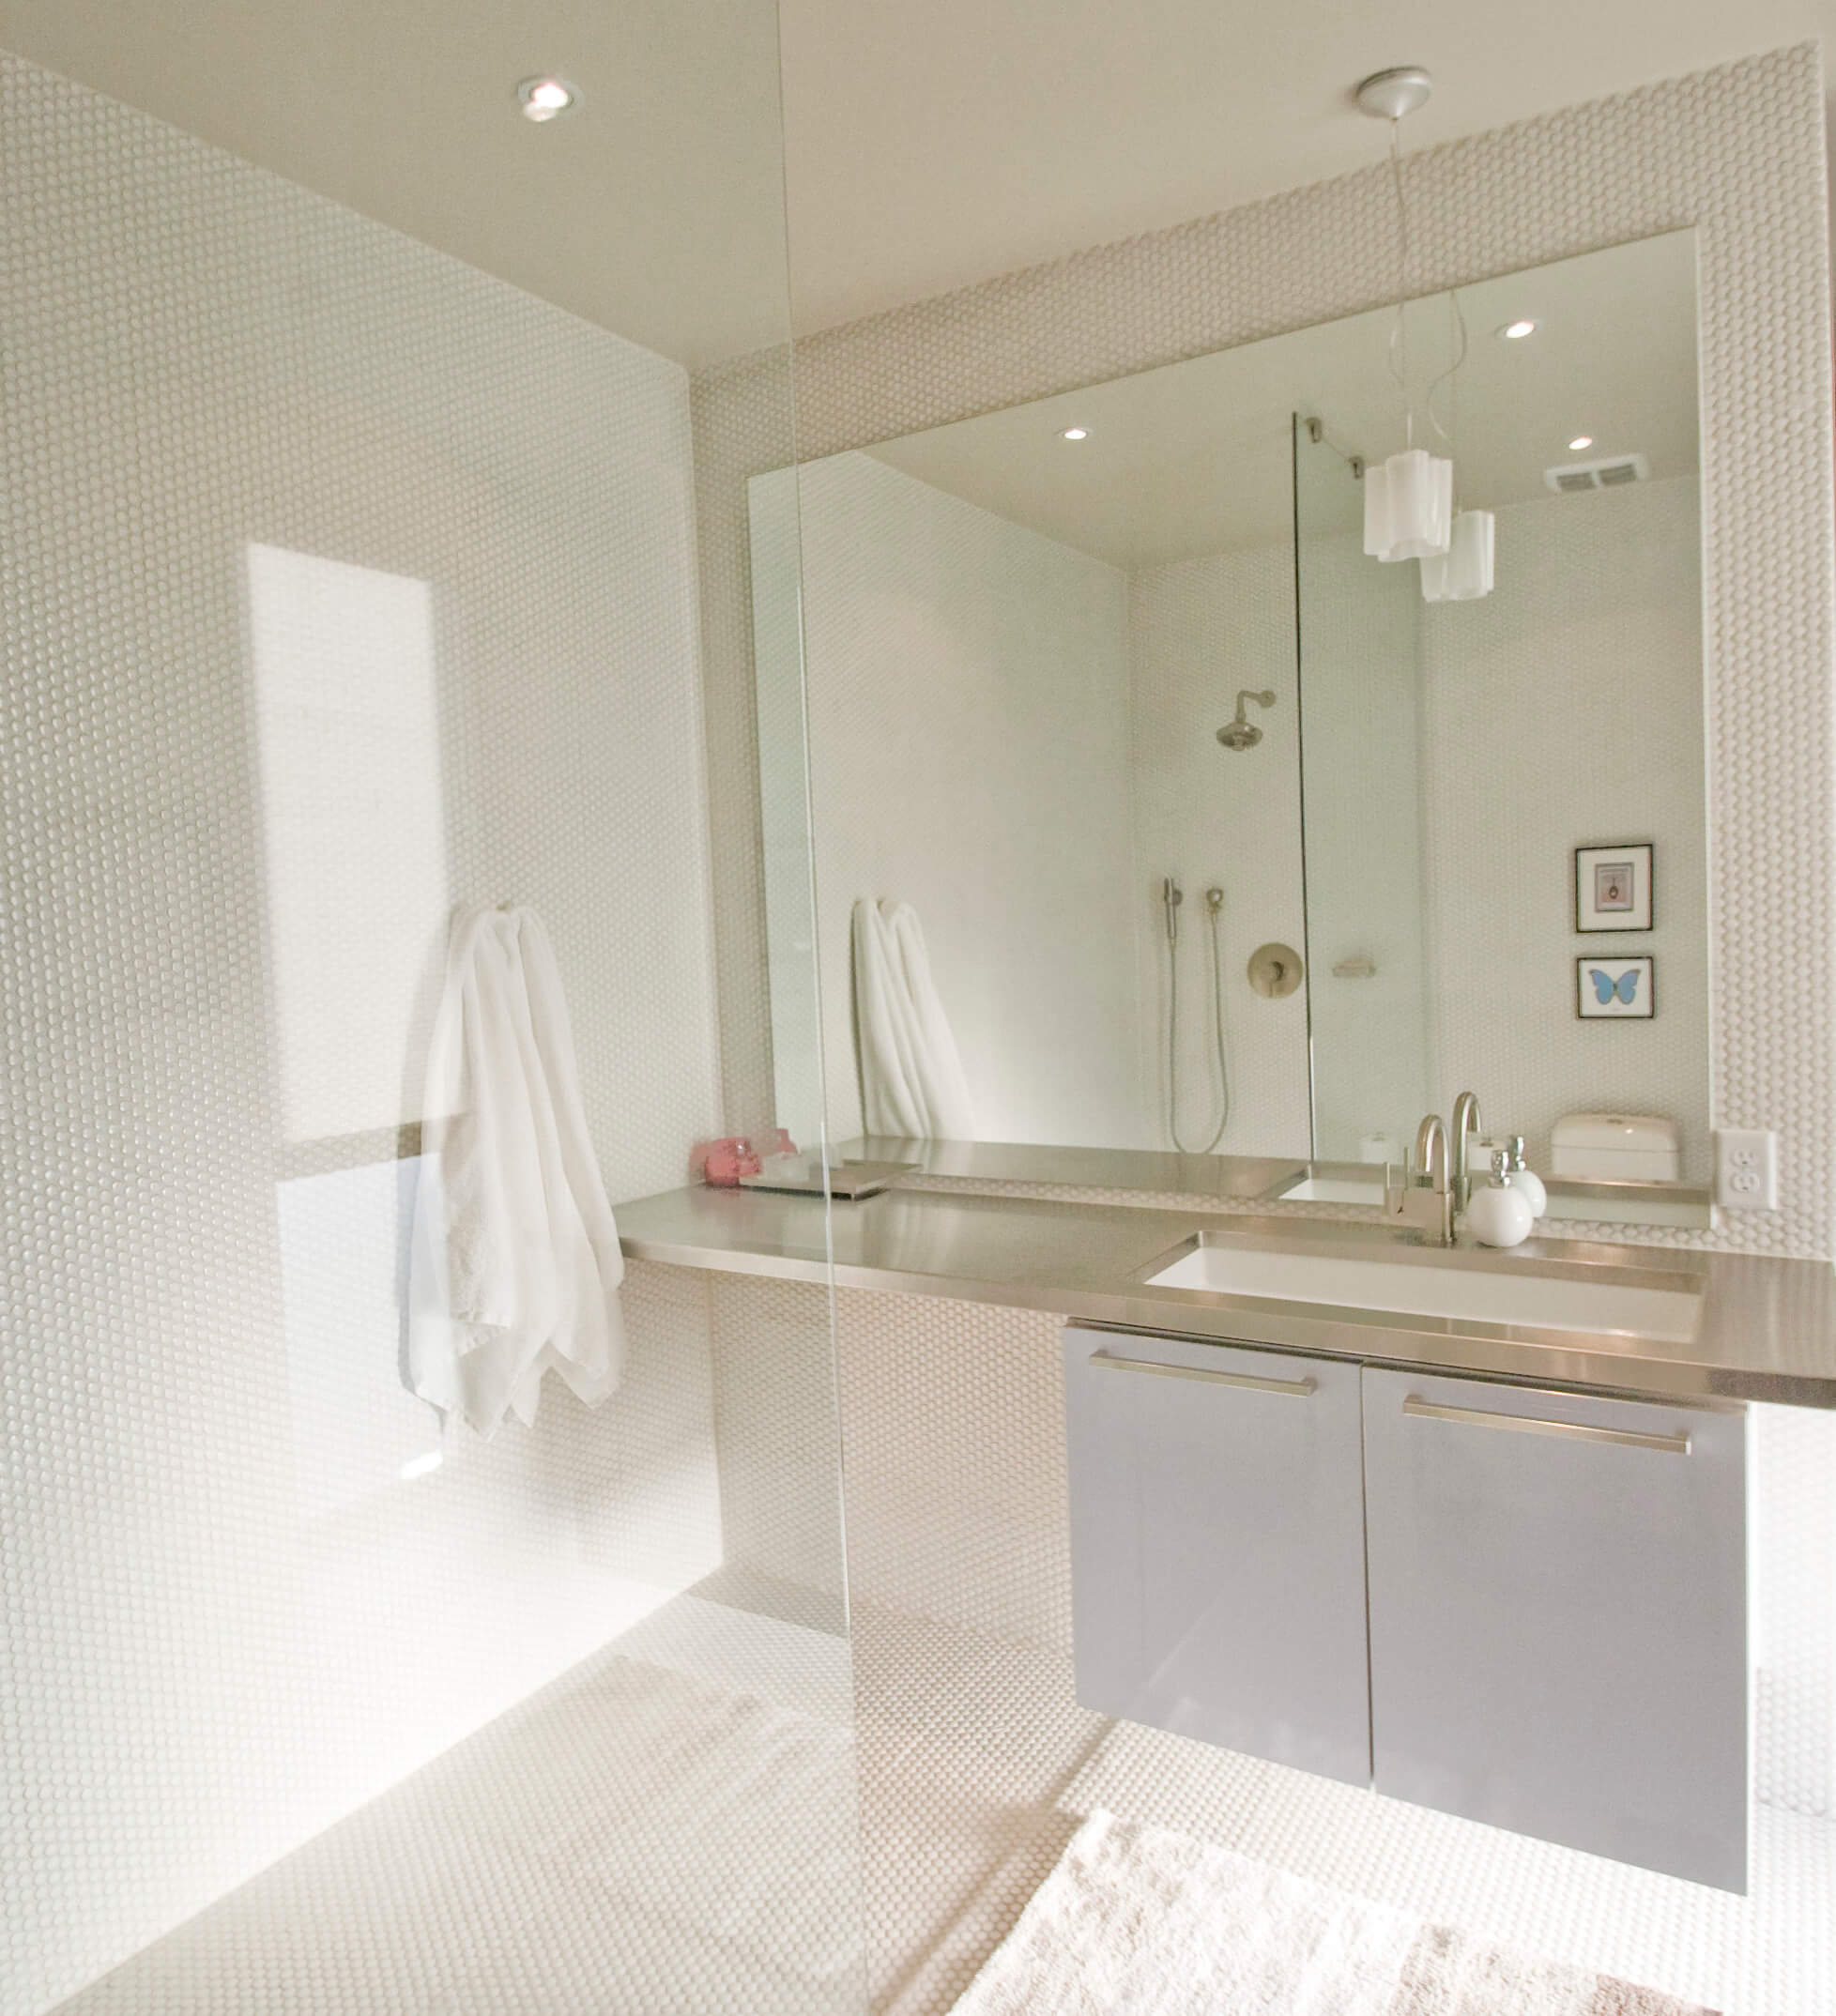 A bathroom with a large mirror and sink.